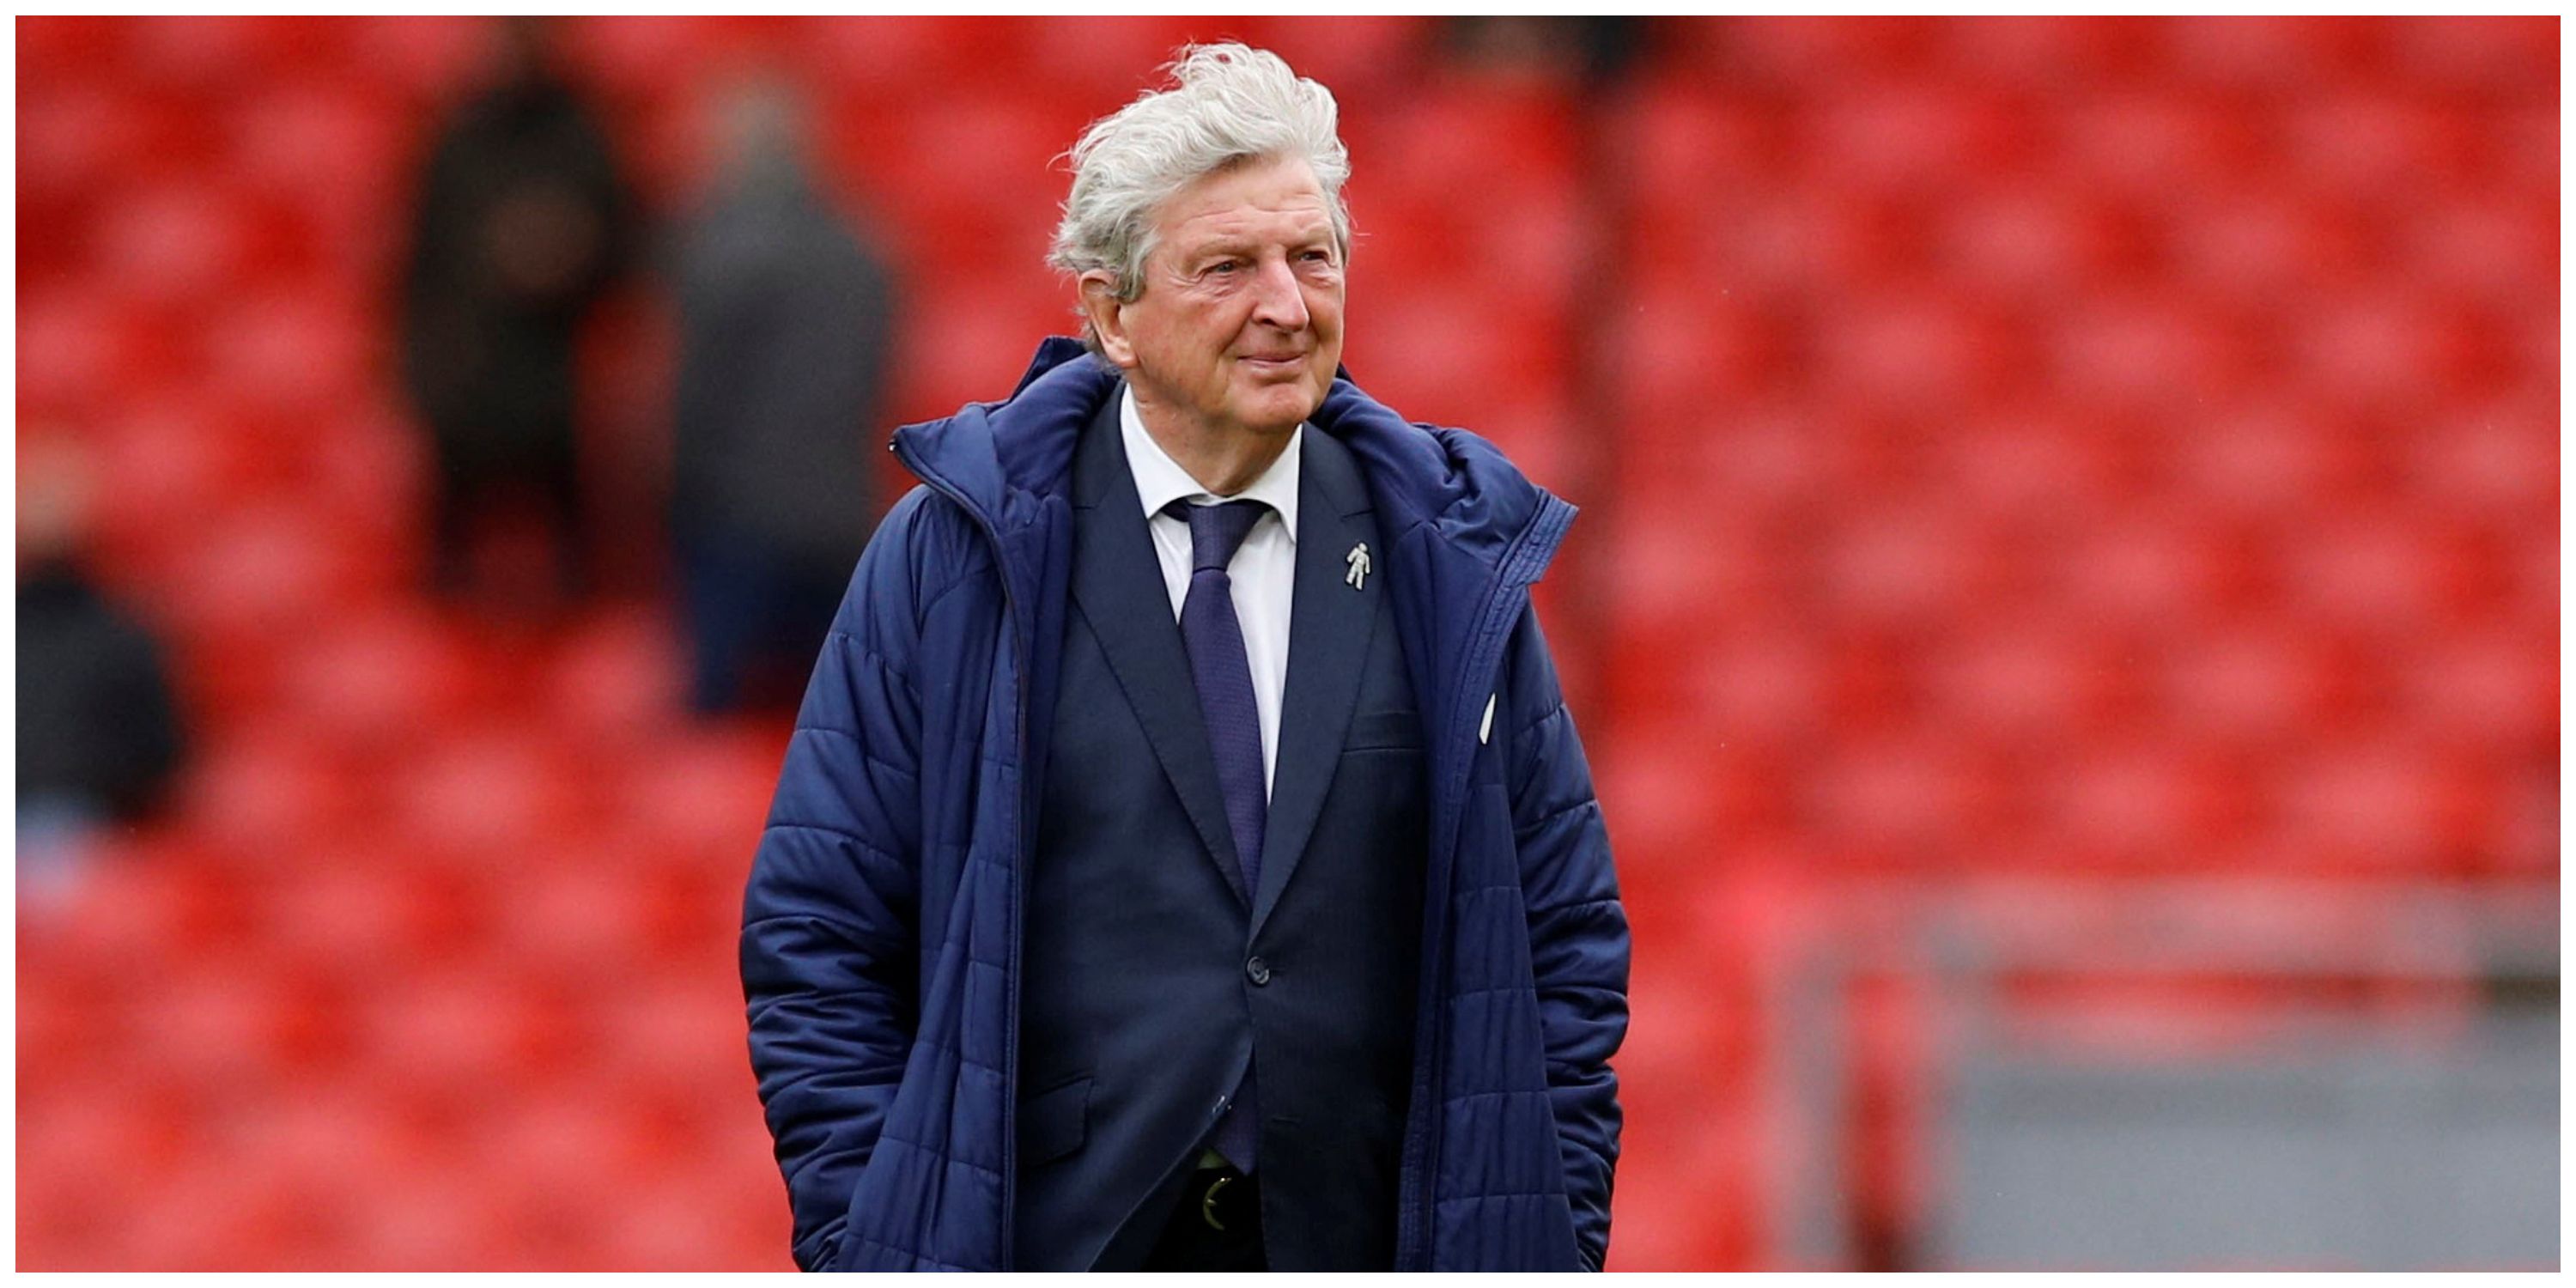 Crystal Palace manager Roy Hodgson on the pitch before the match